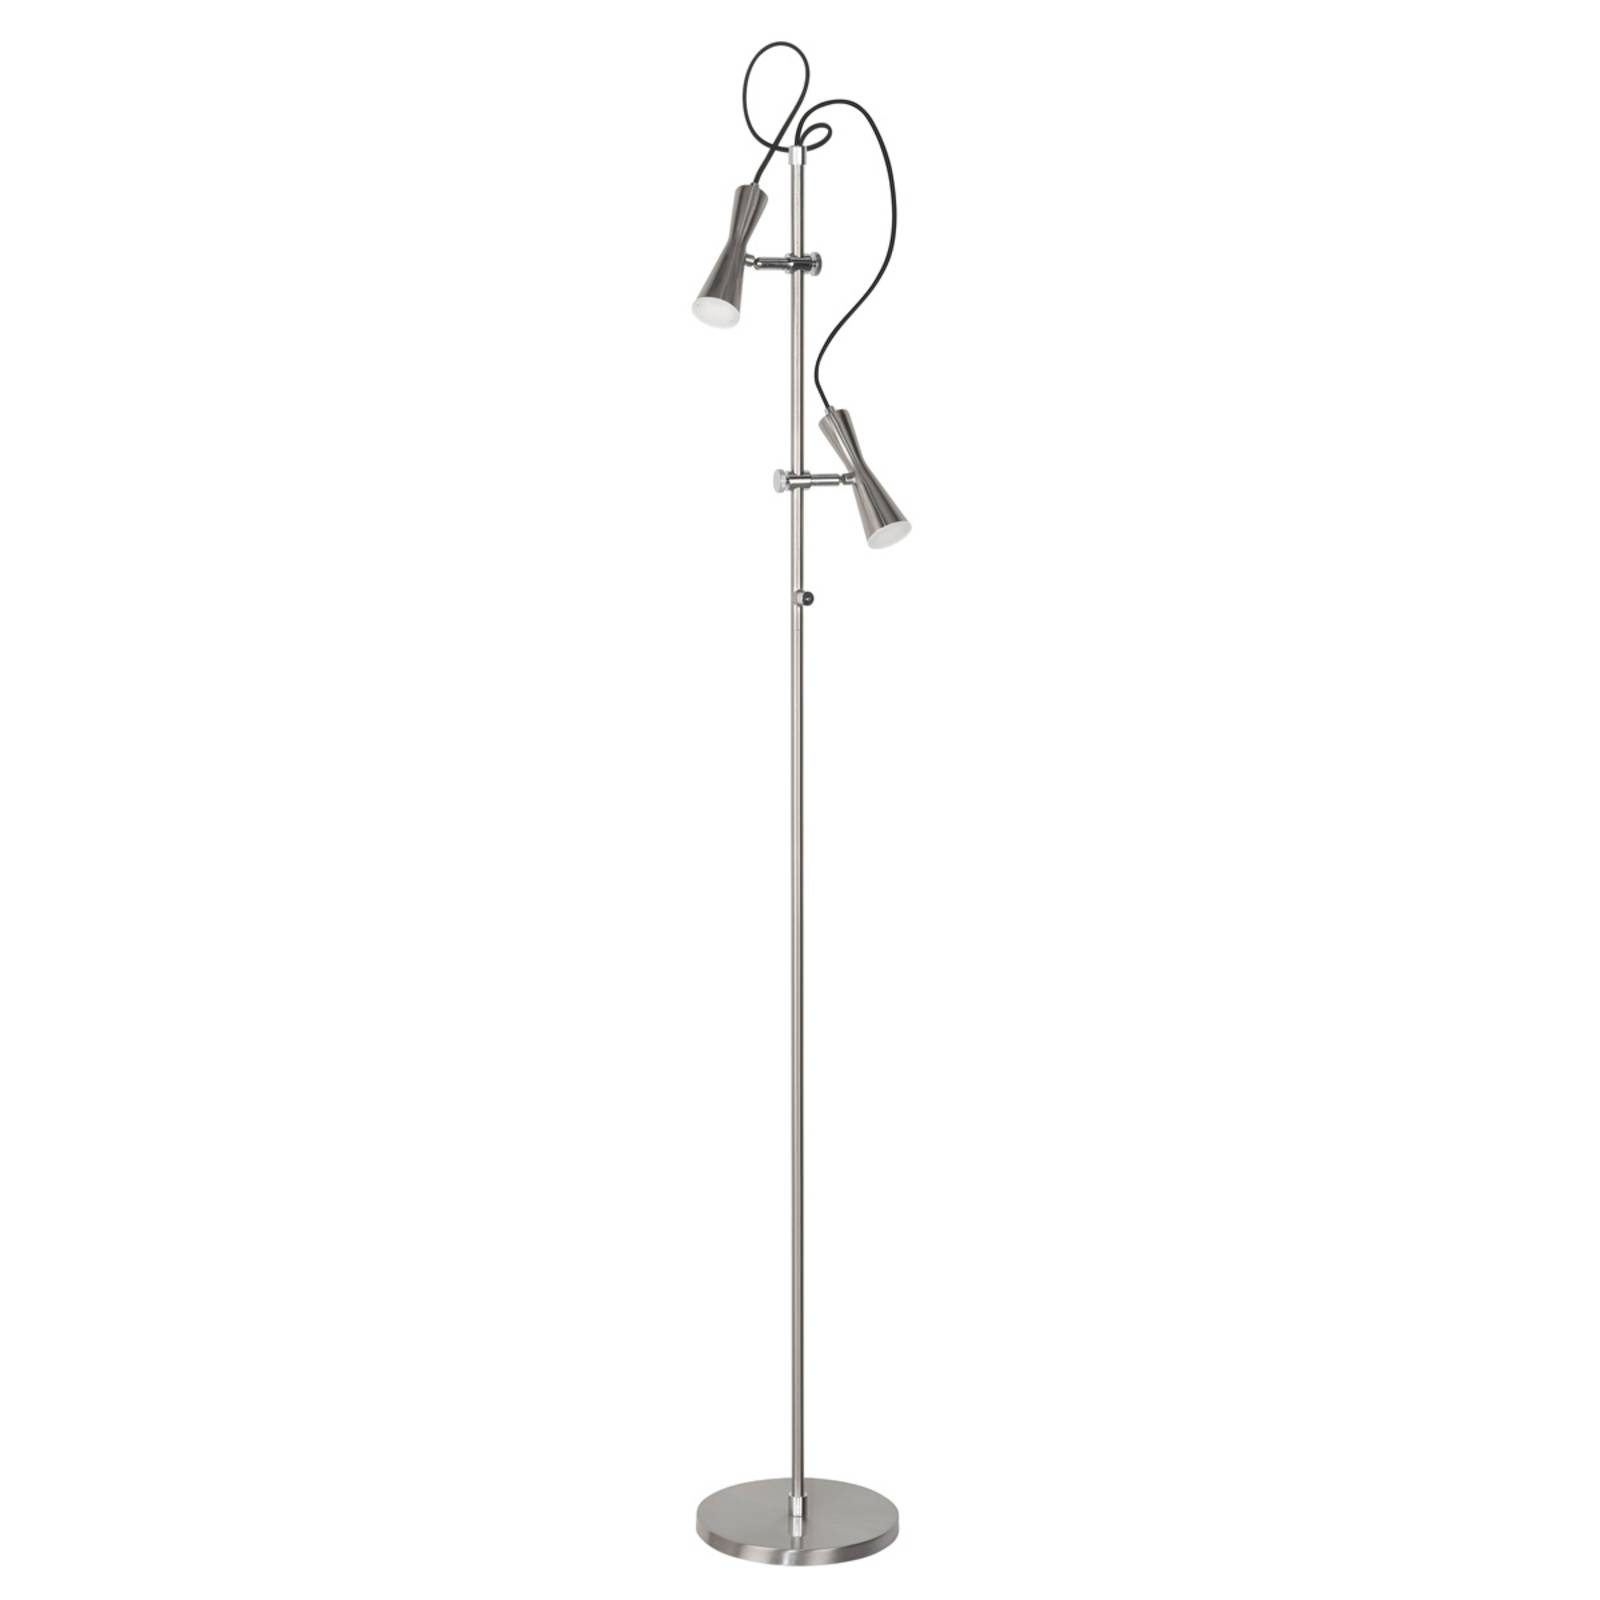 Lampadaire LED Move sophistiqué, 2 lampes, nickel